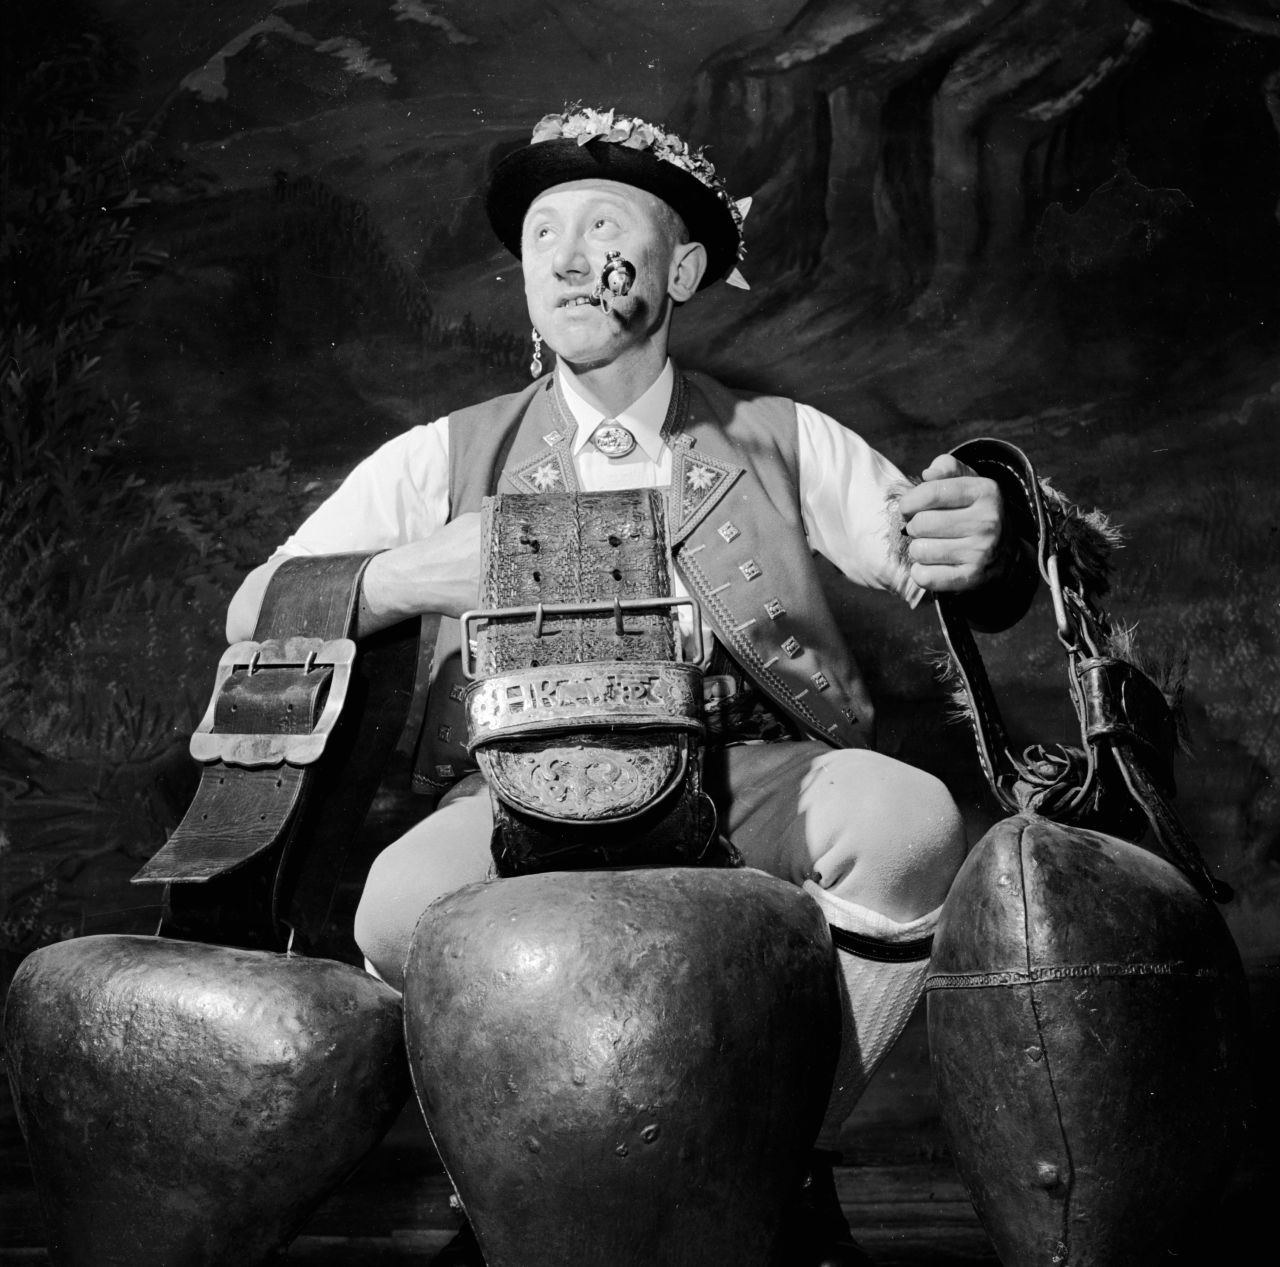 An Alpiner with three large cow bells, which produce that sombre rhythmic sound, at a traditional bell-swinging festival in 1955.